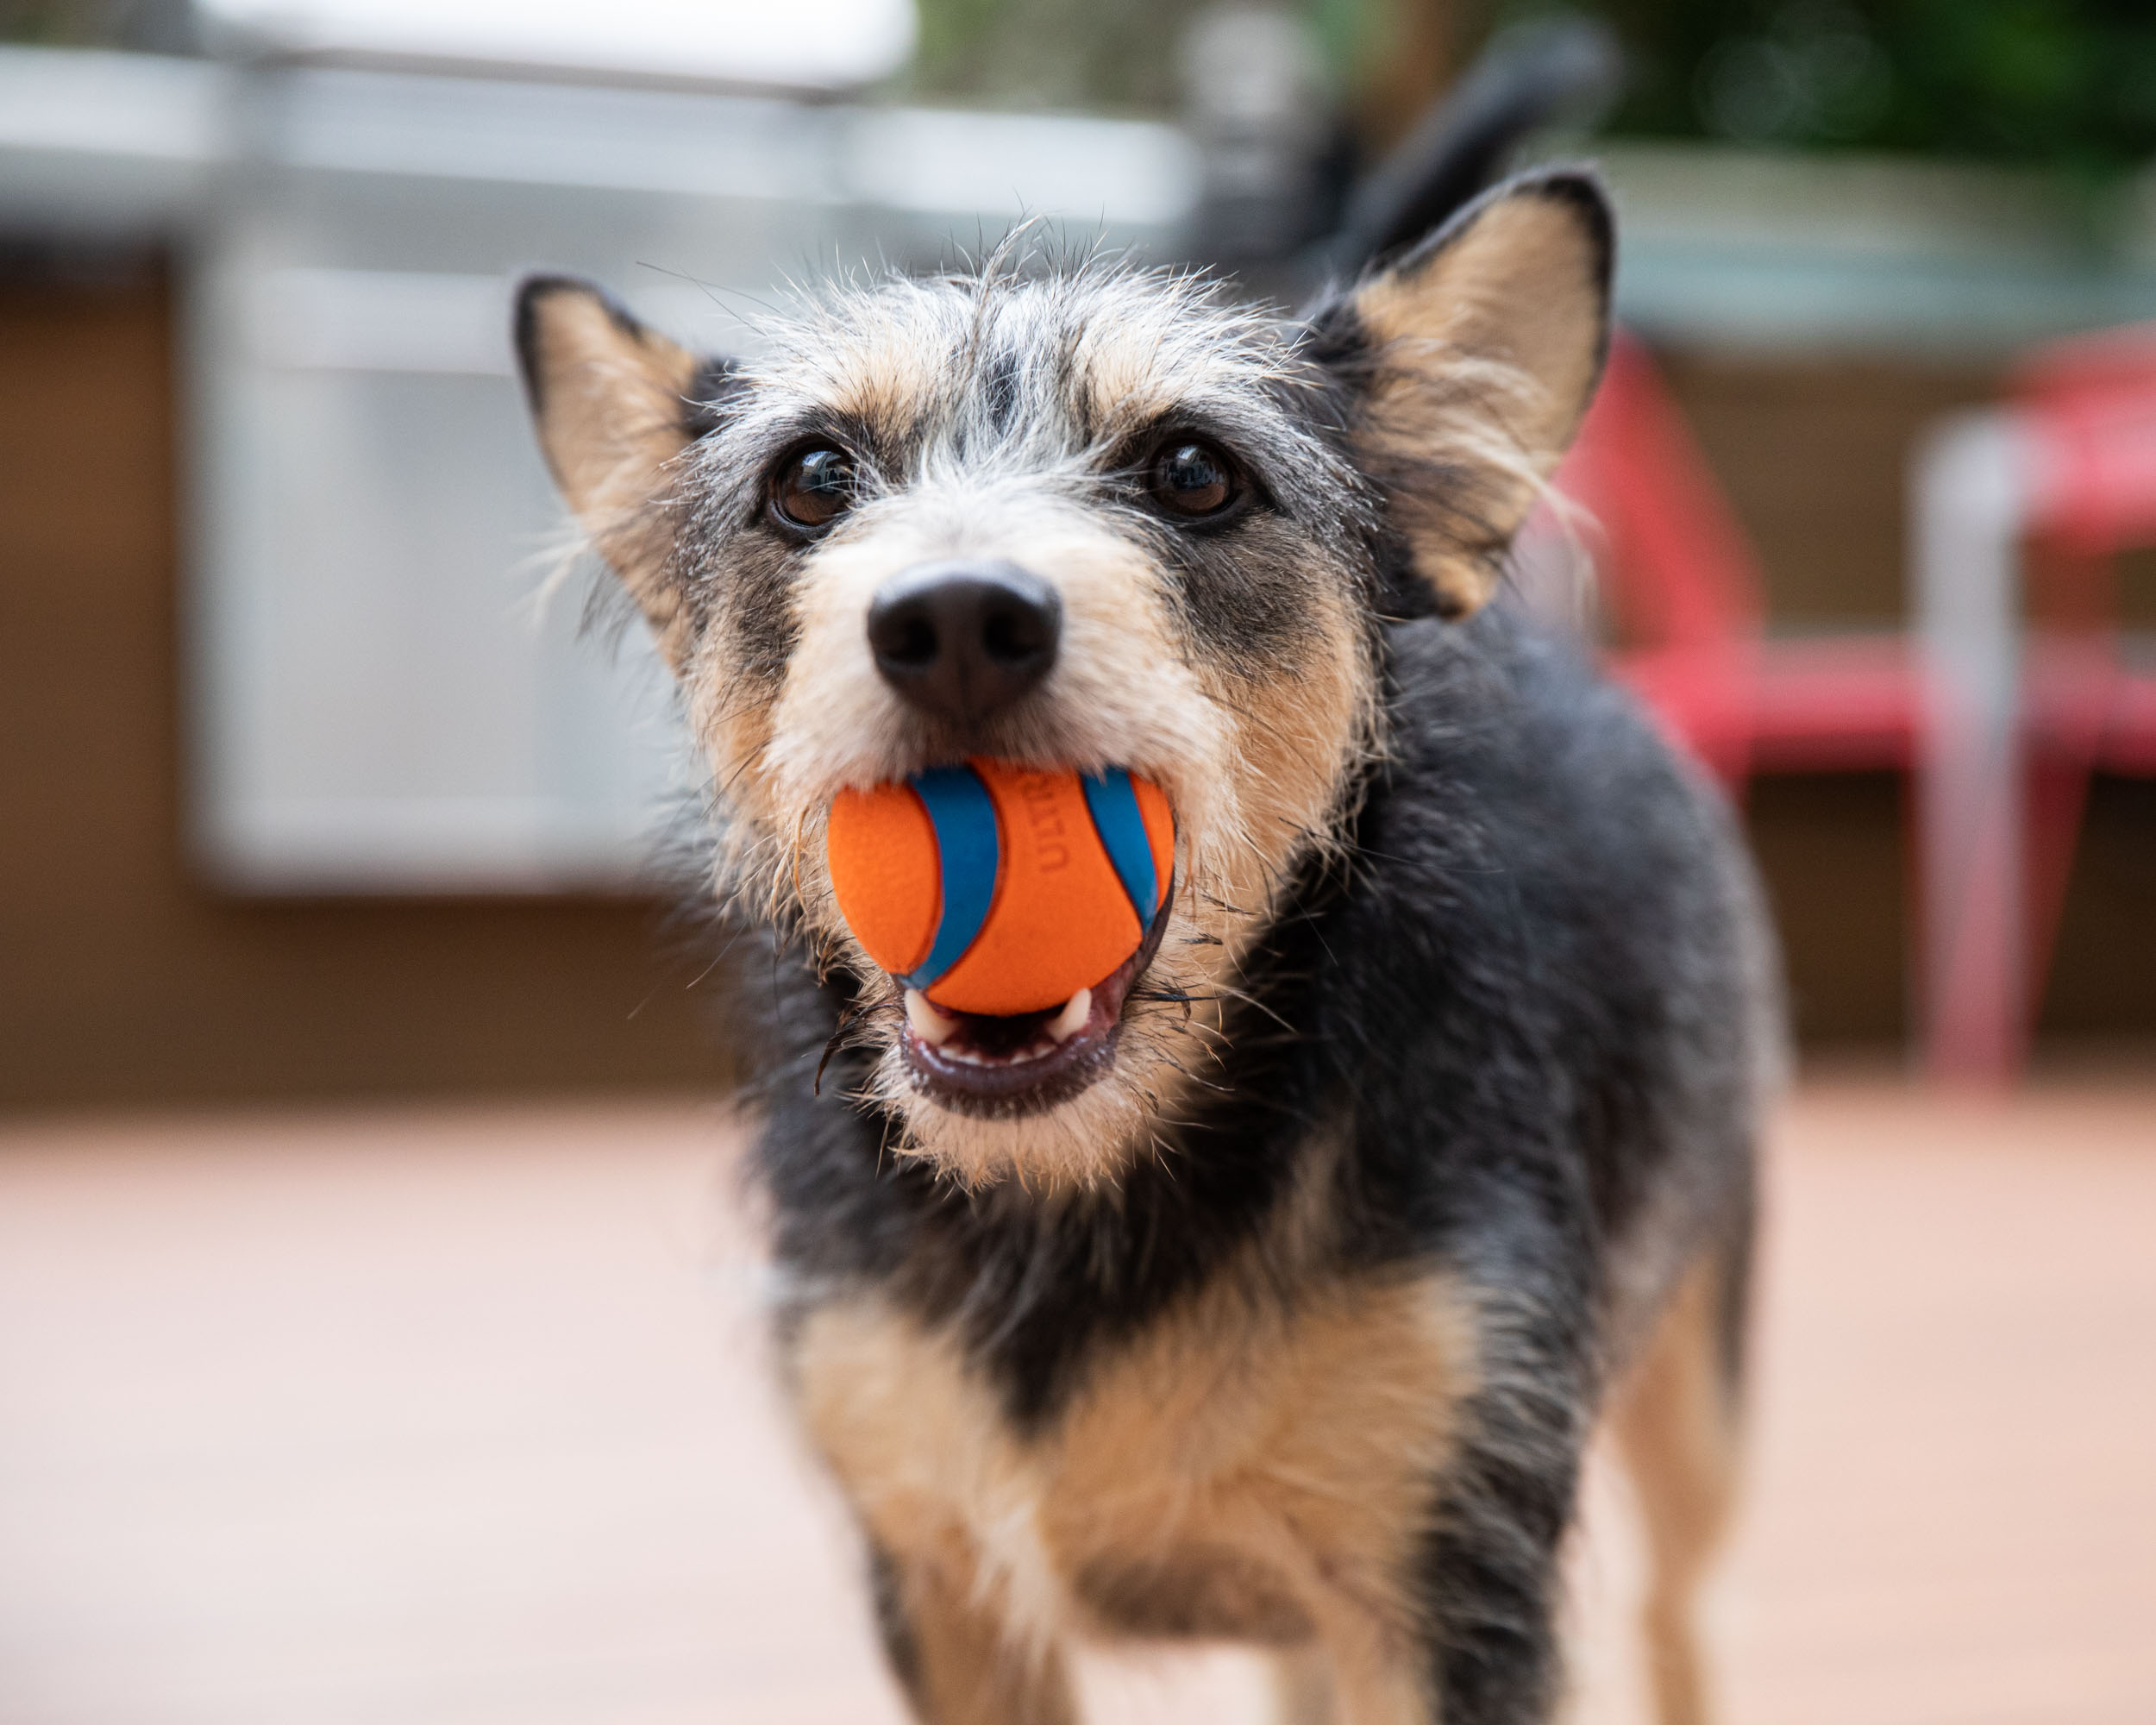 Pet Lifestyle Photography | Terrier with Ball in Mouth by Mark Rogers